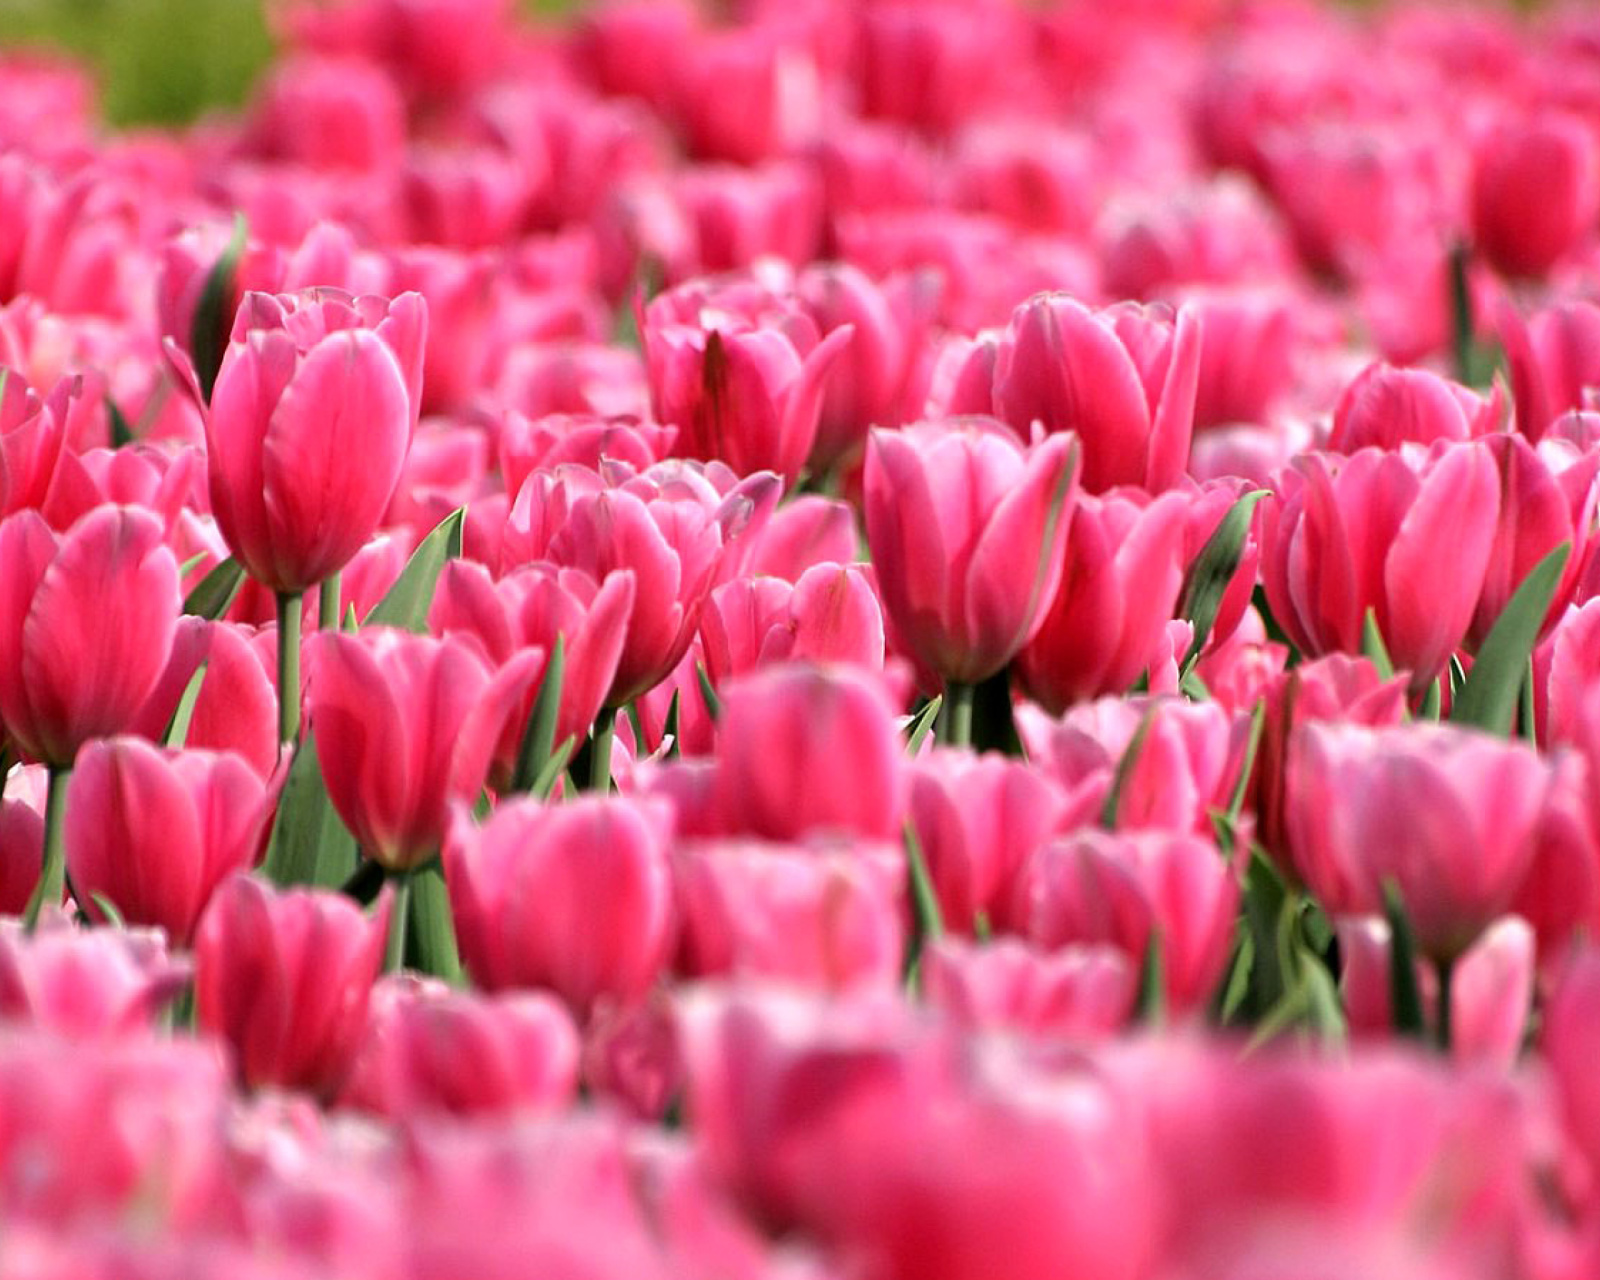 Pink Tulips in Holland Festival screenshot #1 1600x1280